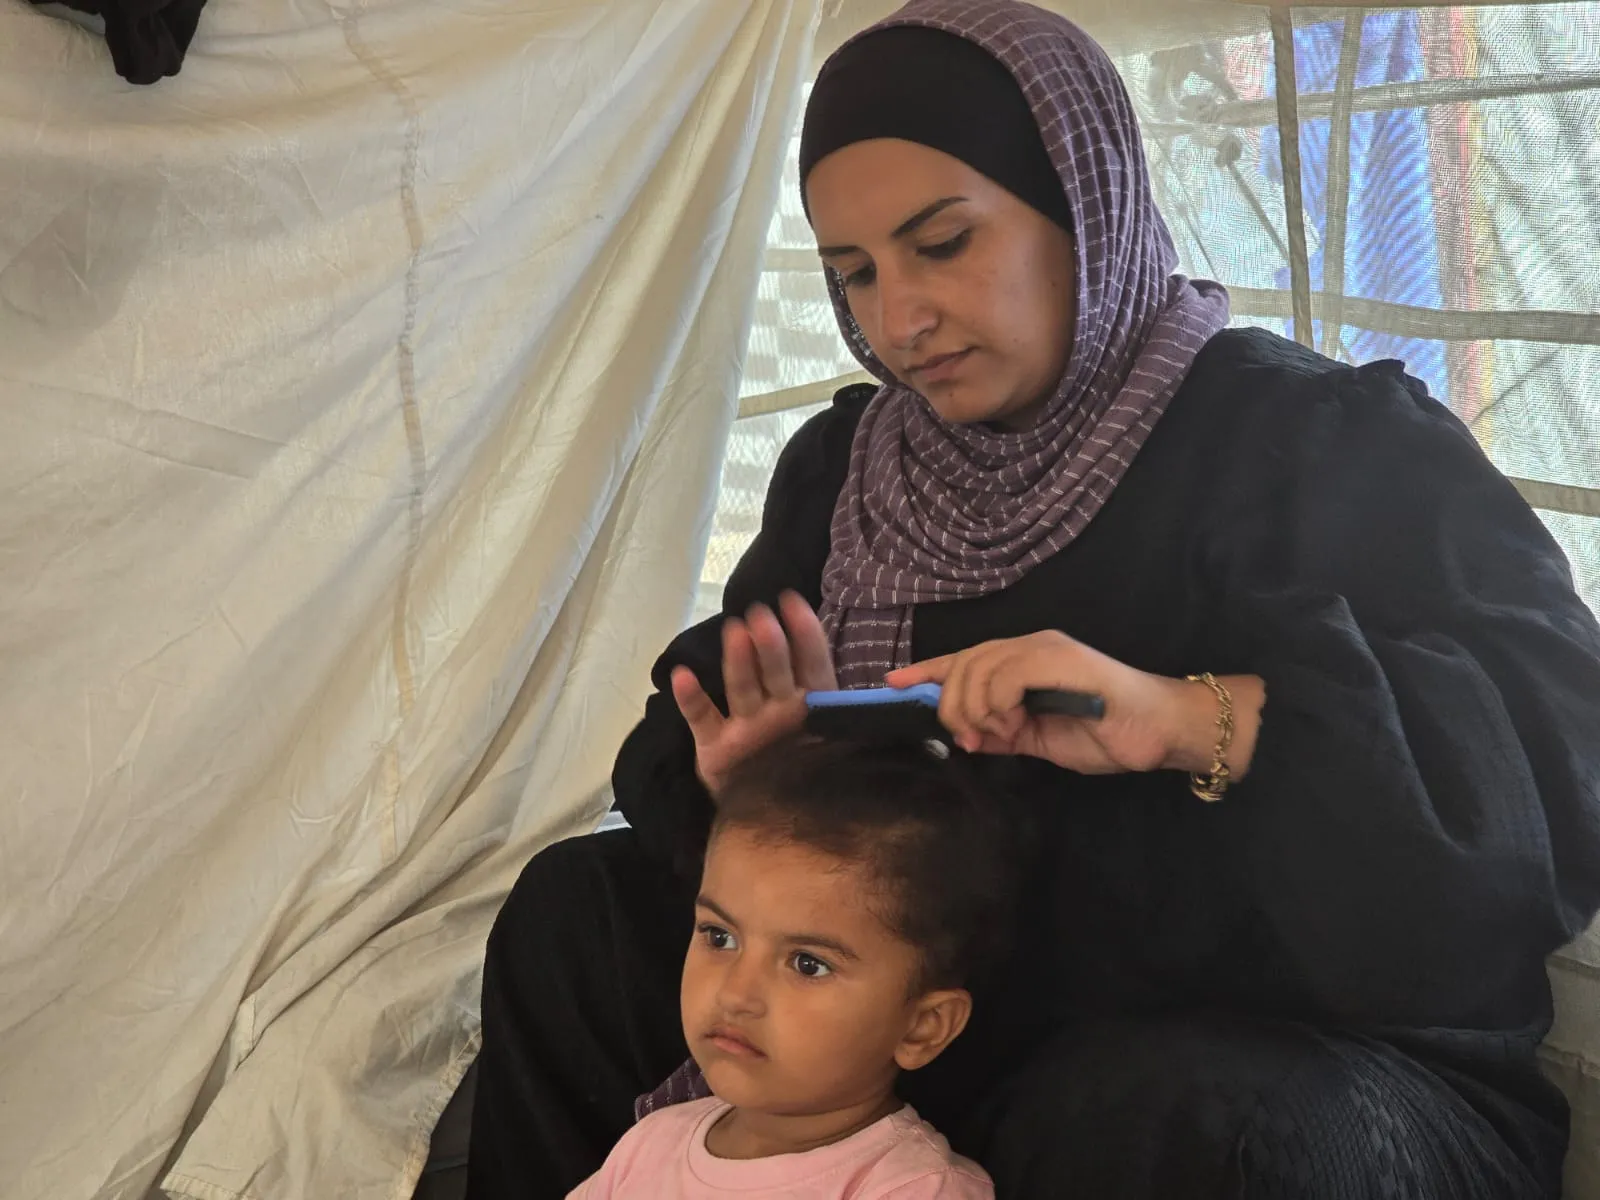 A woman in a head covering combs a child’s hair.